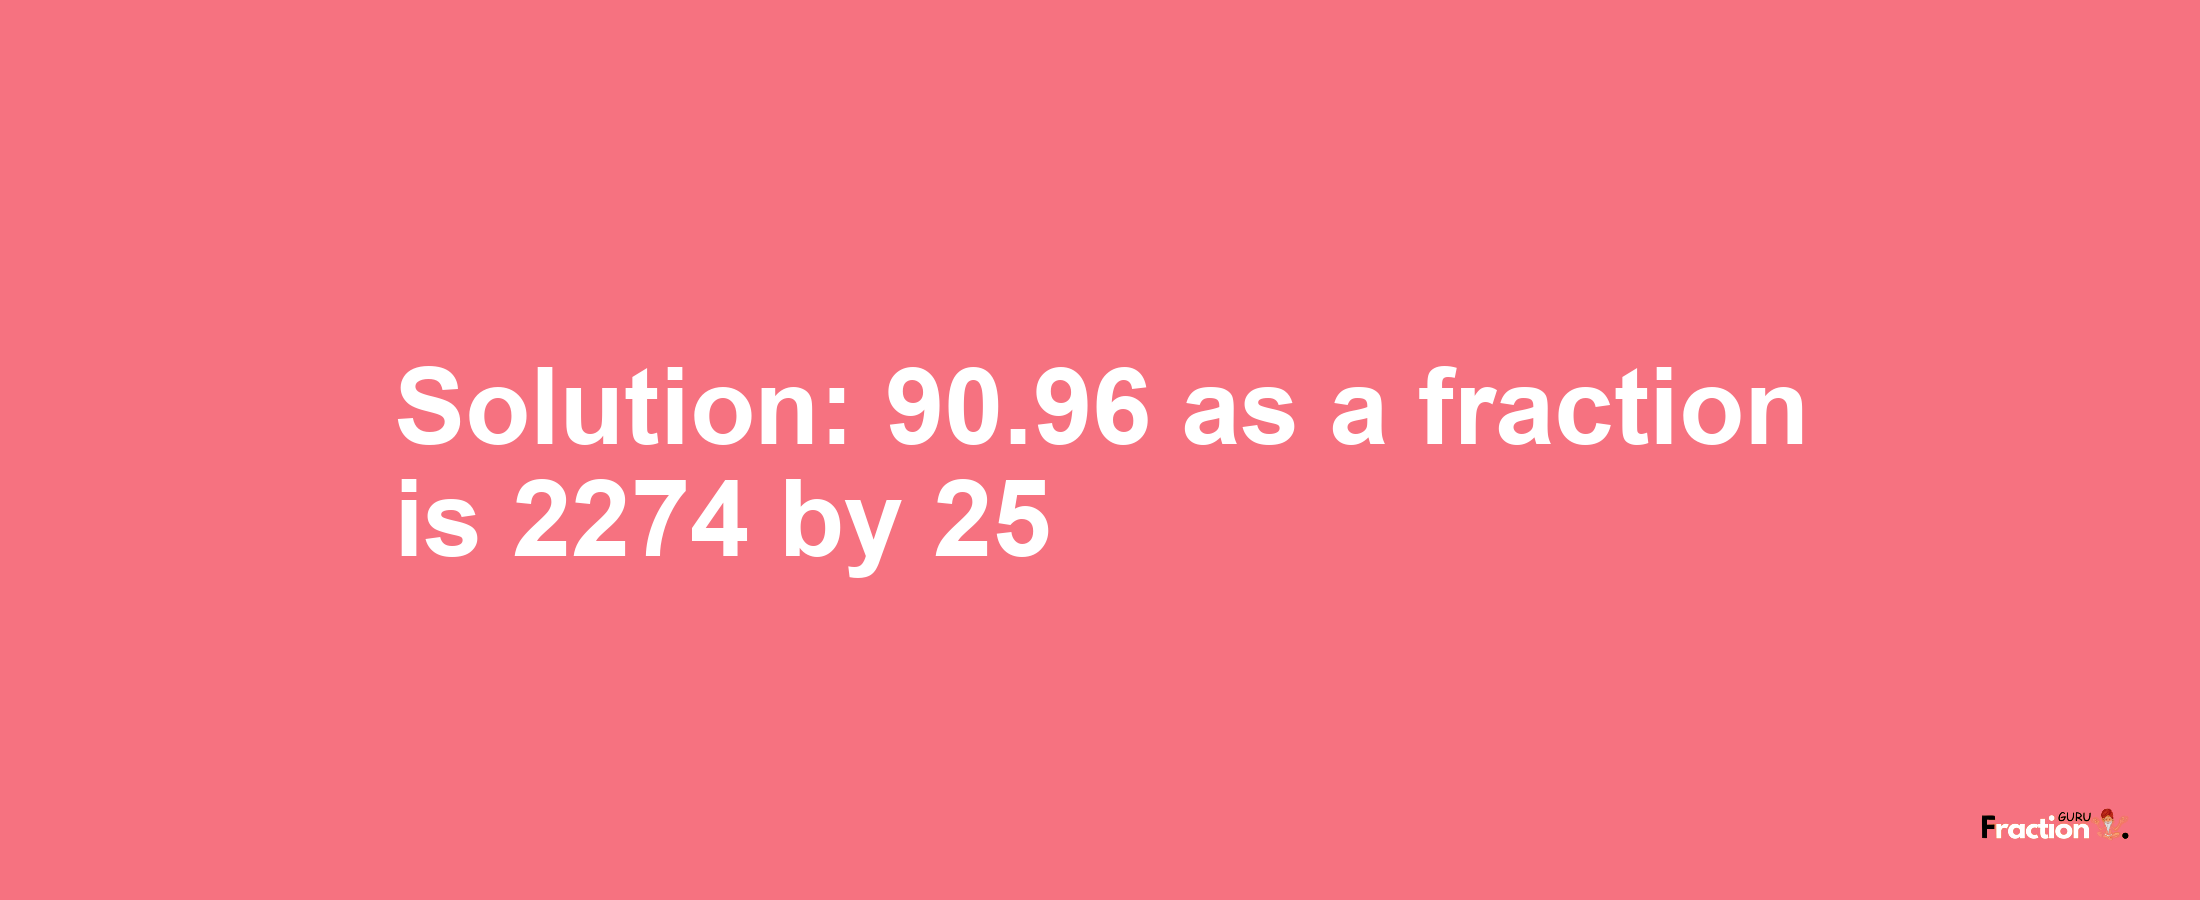 Solution:90.96 as a fraction is 2274/25